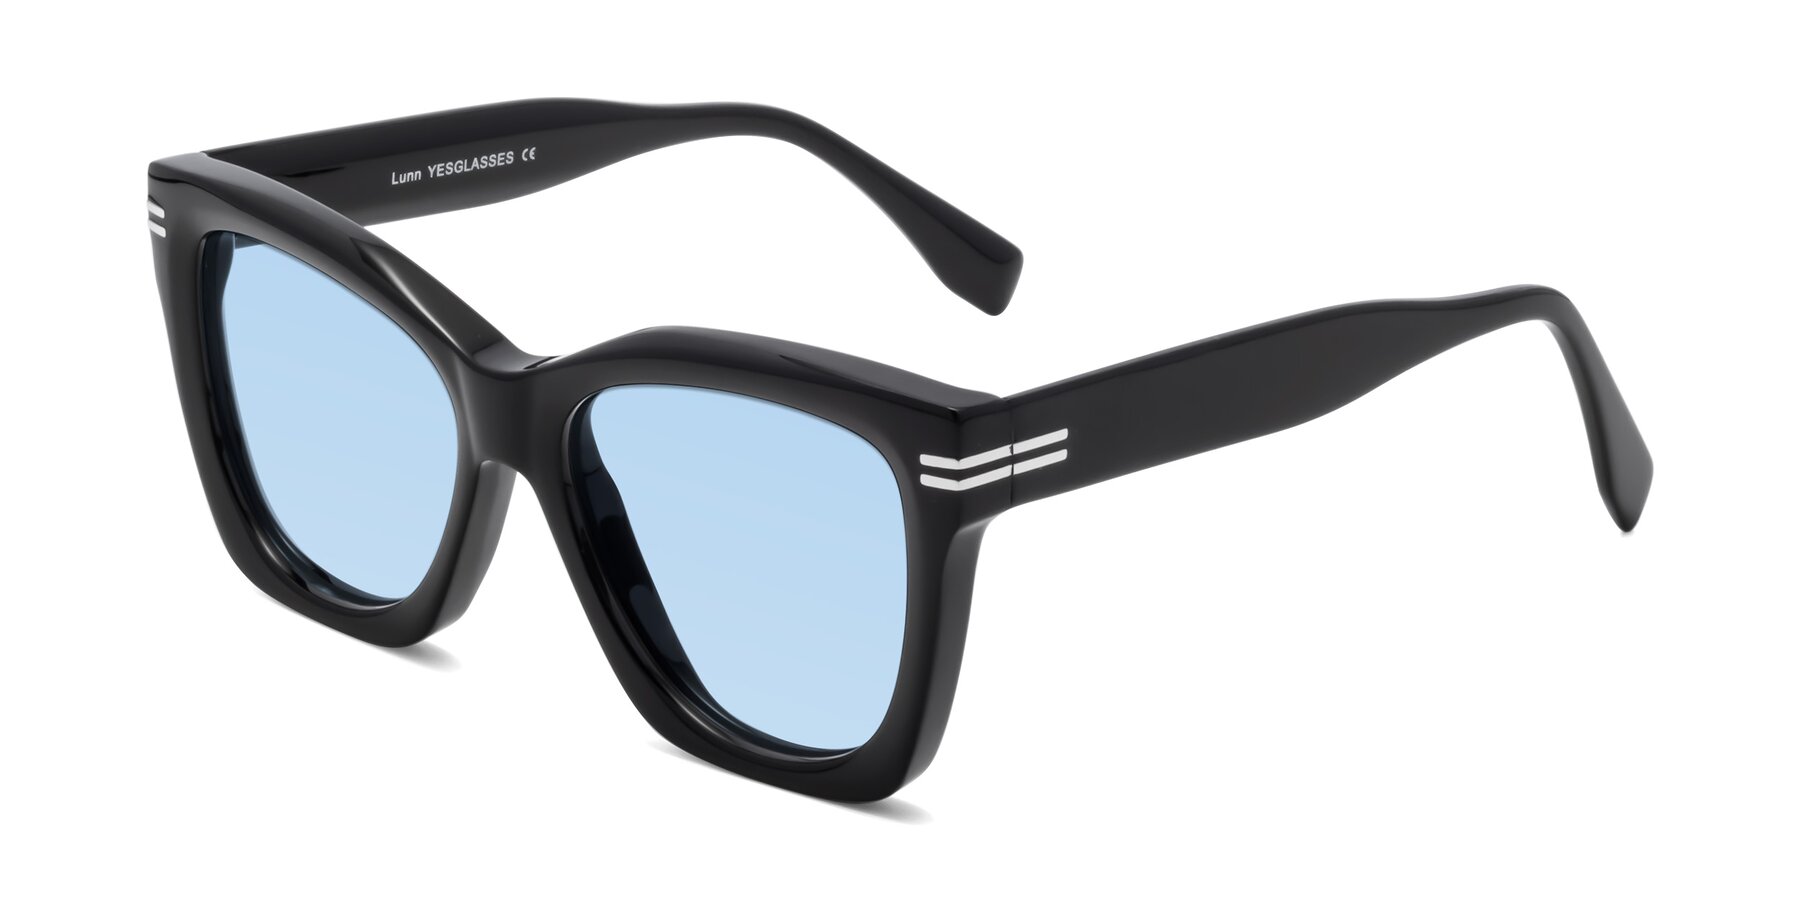 Angle of Lunn in Black with Light Blue Tinted Lenses